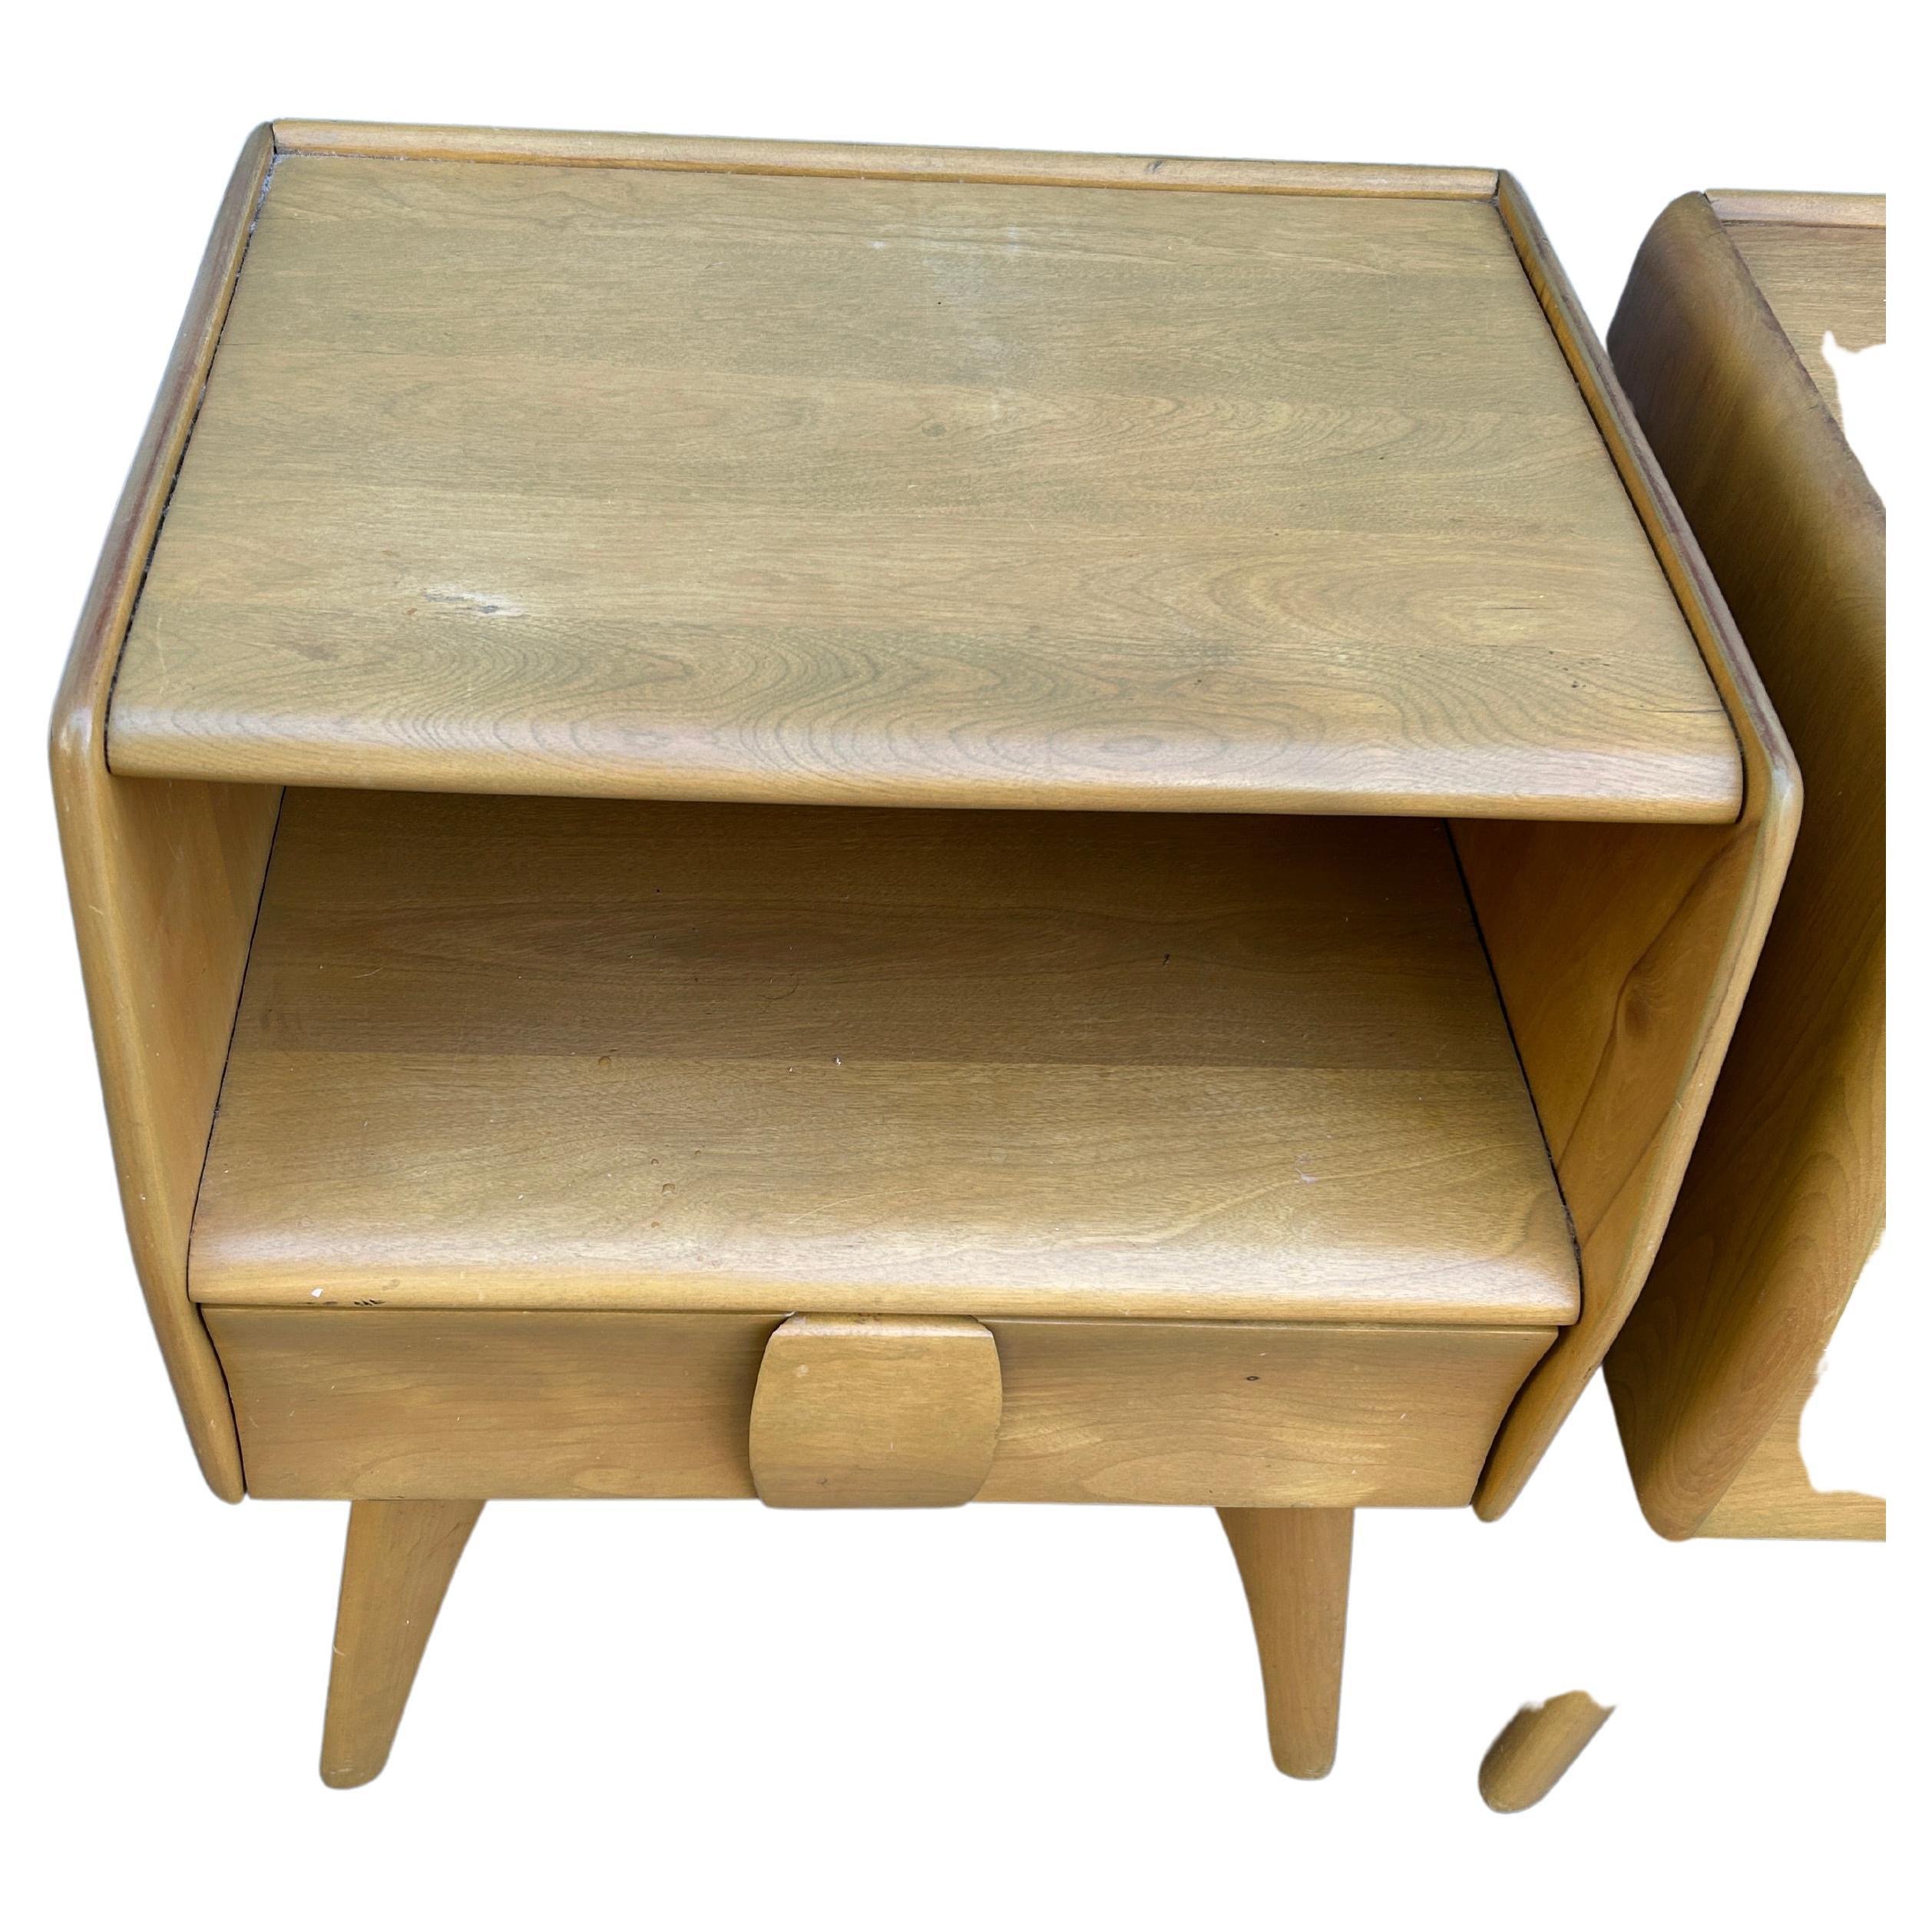 Timeless pair of Heywood Wakefield Mid-Century Modern single drawer nightstands. All solid maple construction with sculpted legs and drawer handles. Good vintage condition original blonde finish. Circa 1950 - Located in Brooklyn NYC.

Measures 24